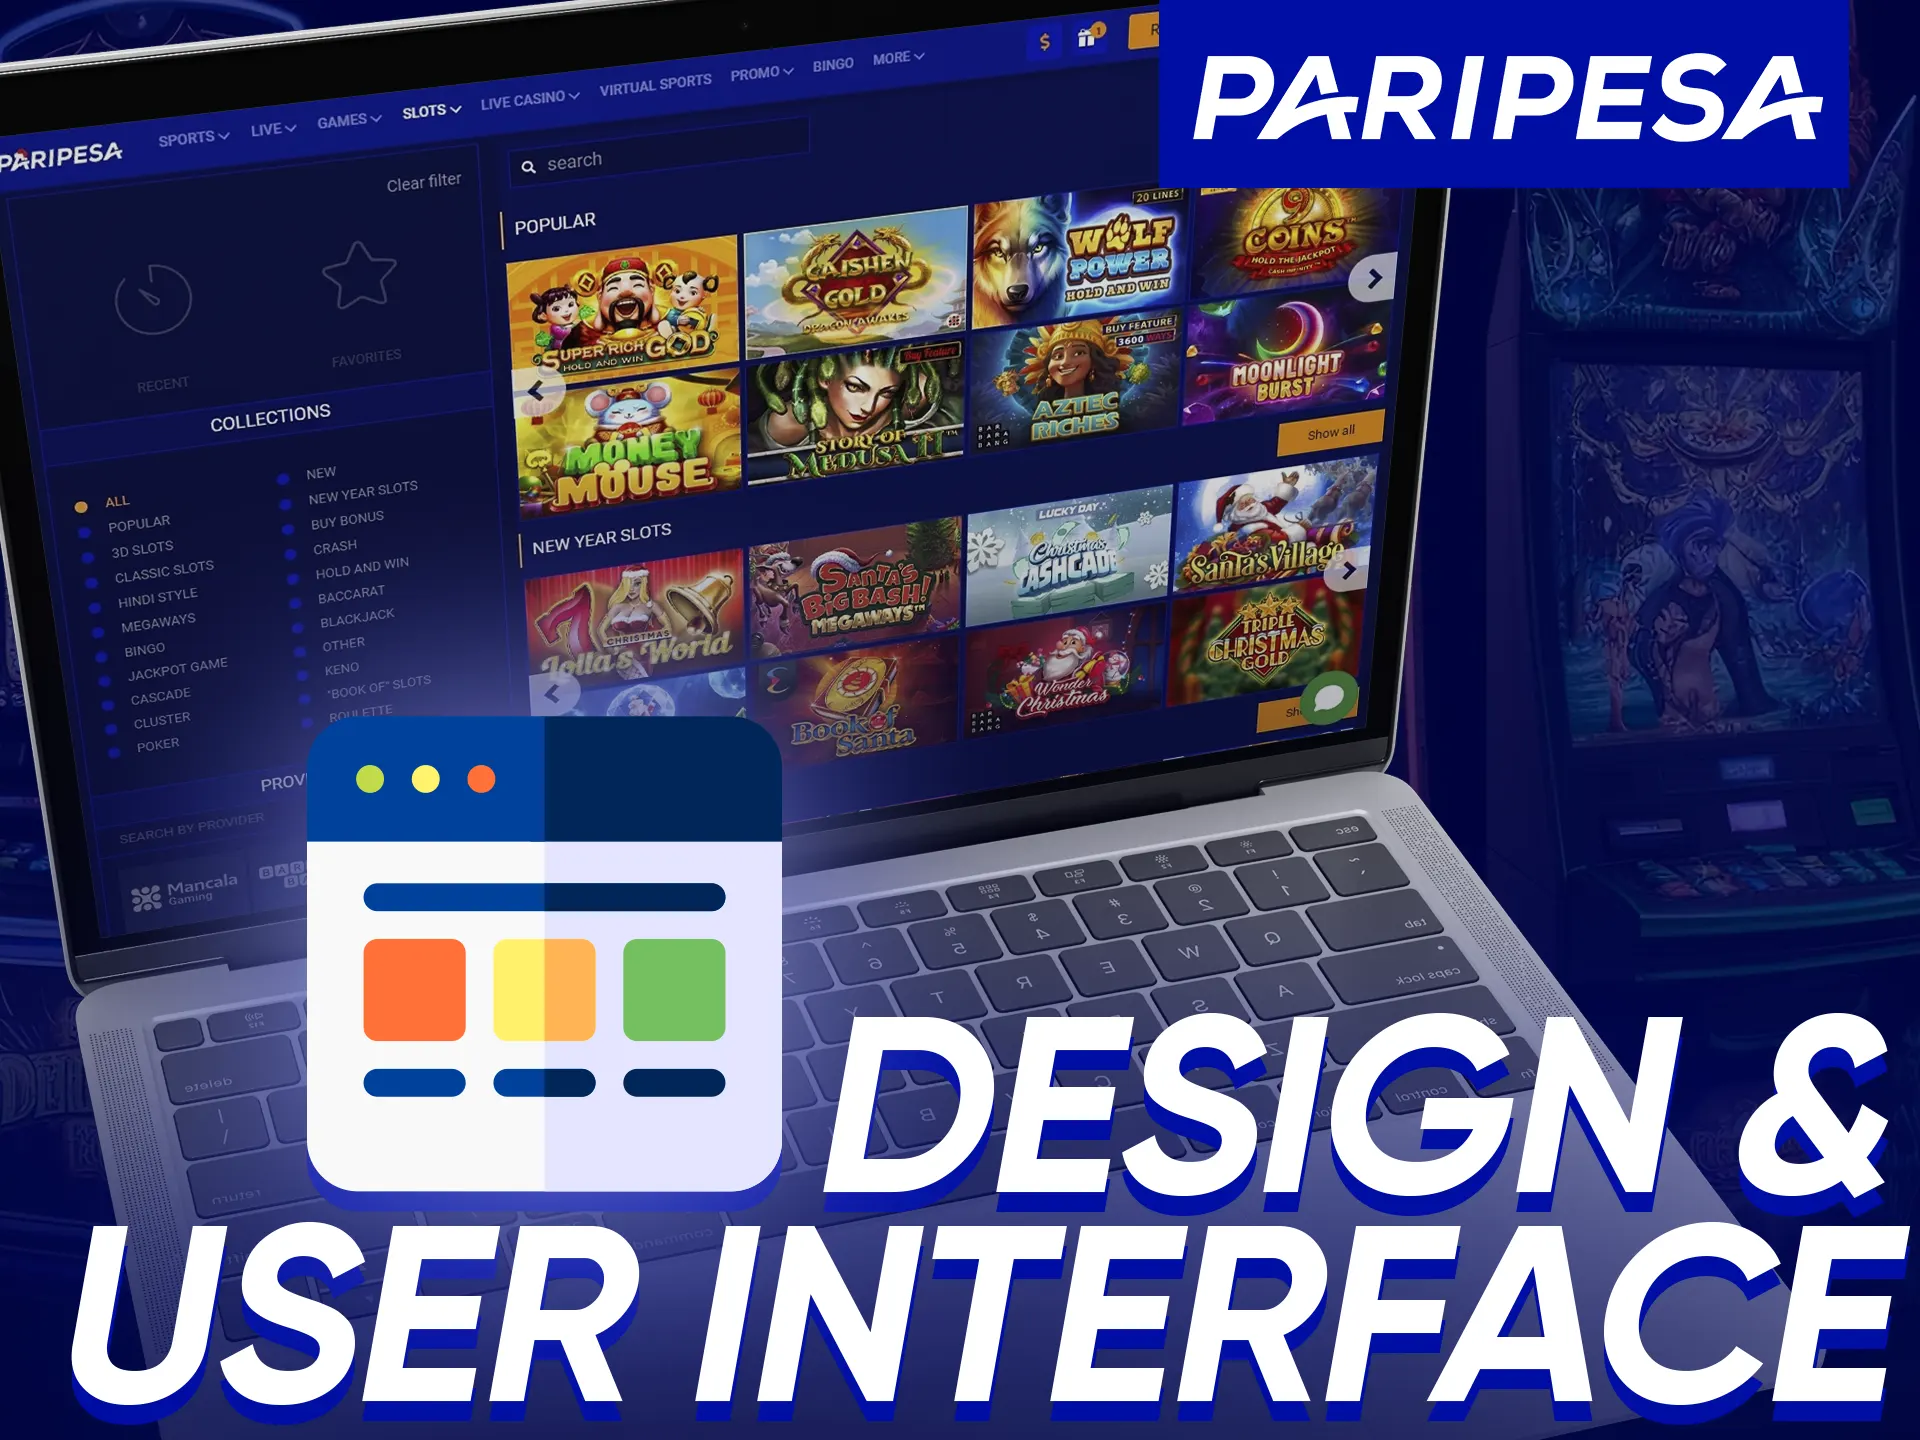 Paripesa Design: Blue-themed, organized sections, user-friendly interface.